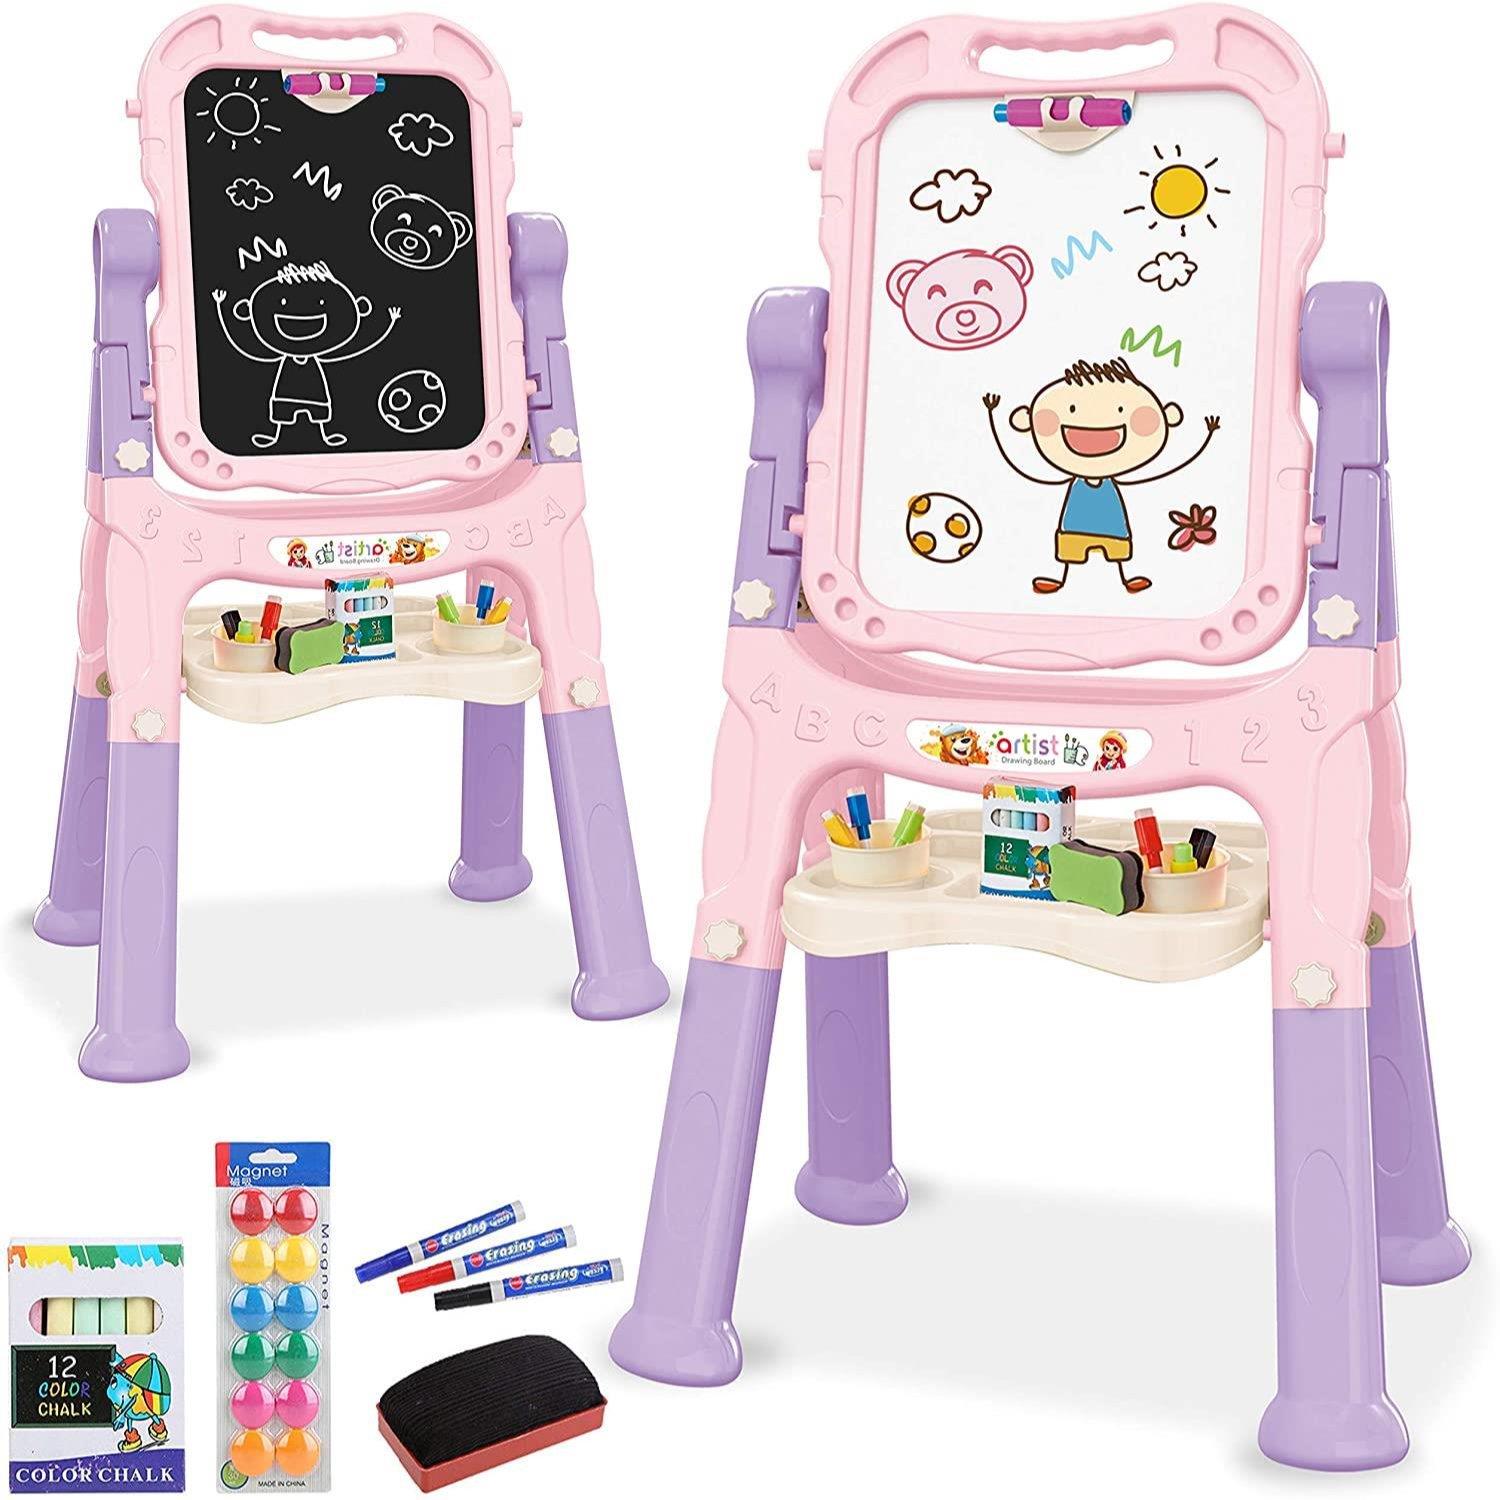 The Magic Toy Shop Toys and Games Pink Folding Double-Sided Magnetic Drawing Board